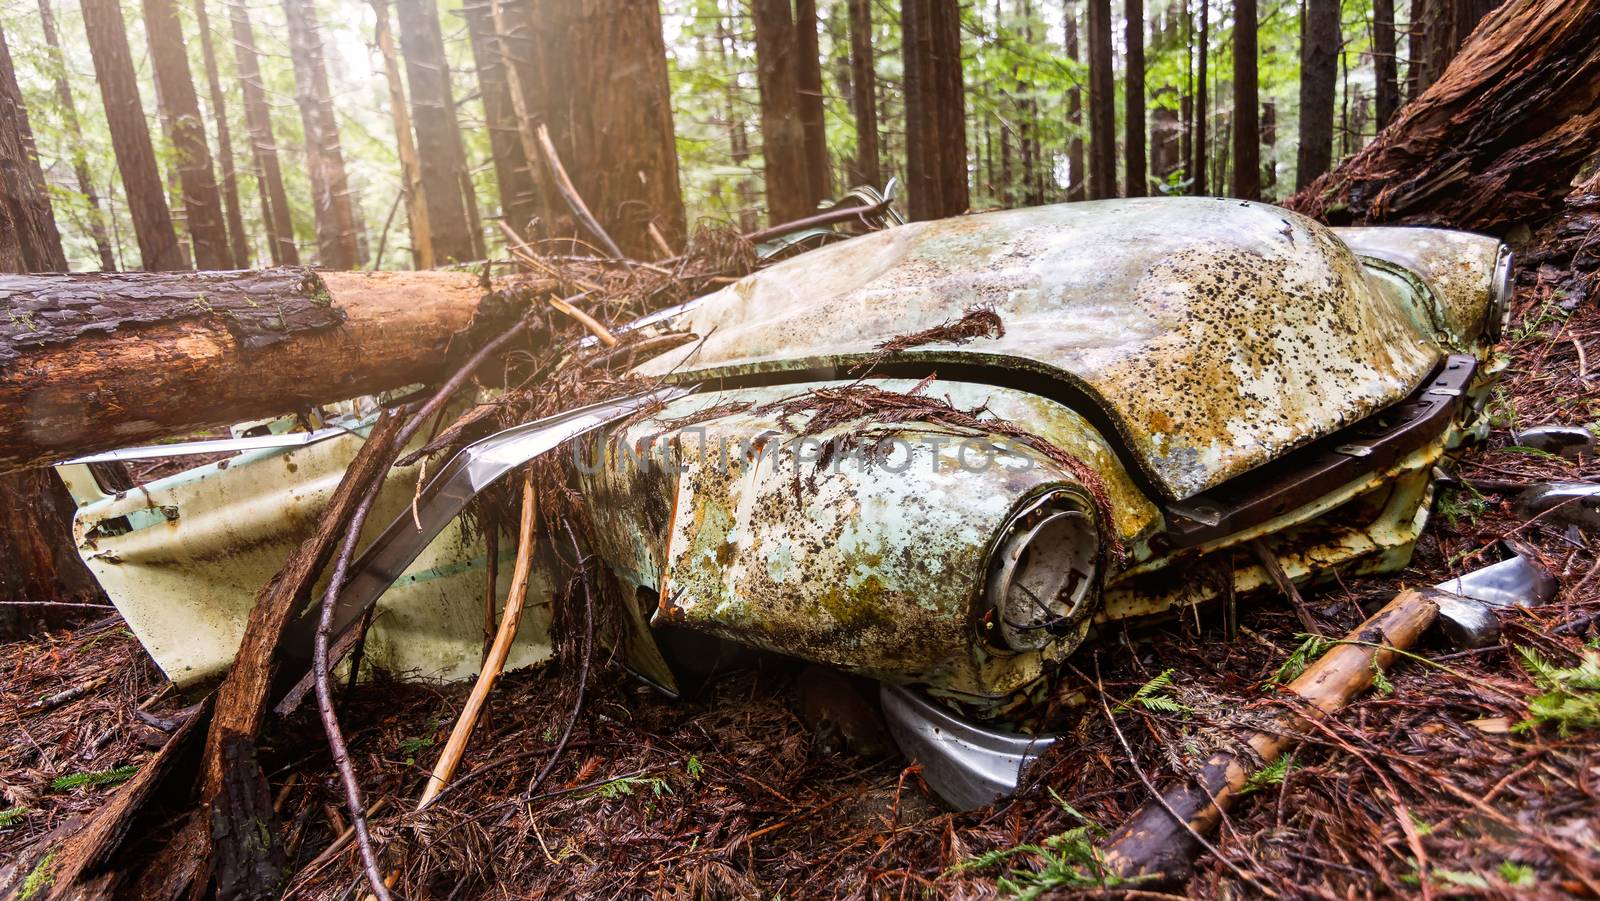 Rusty Vehicle in the Forest by backyard_photography